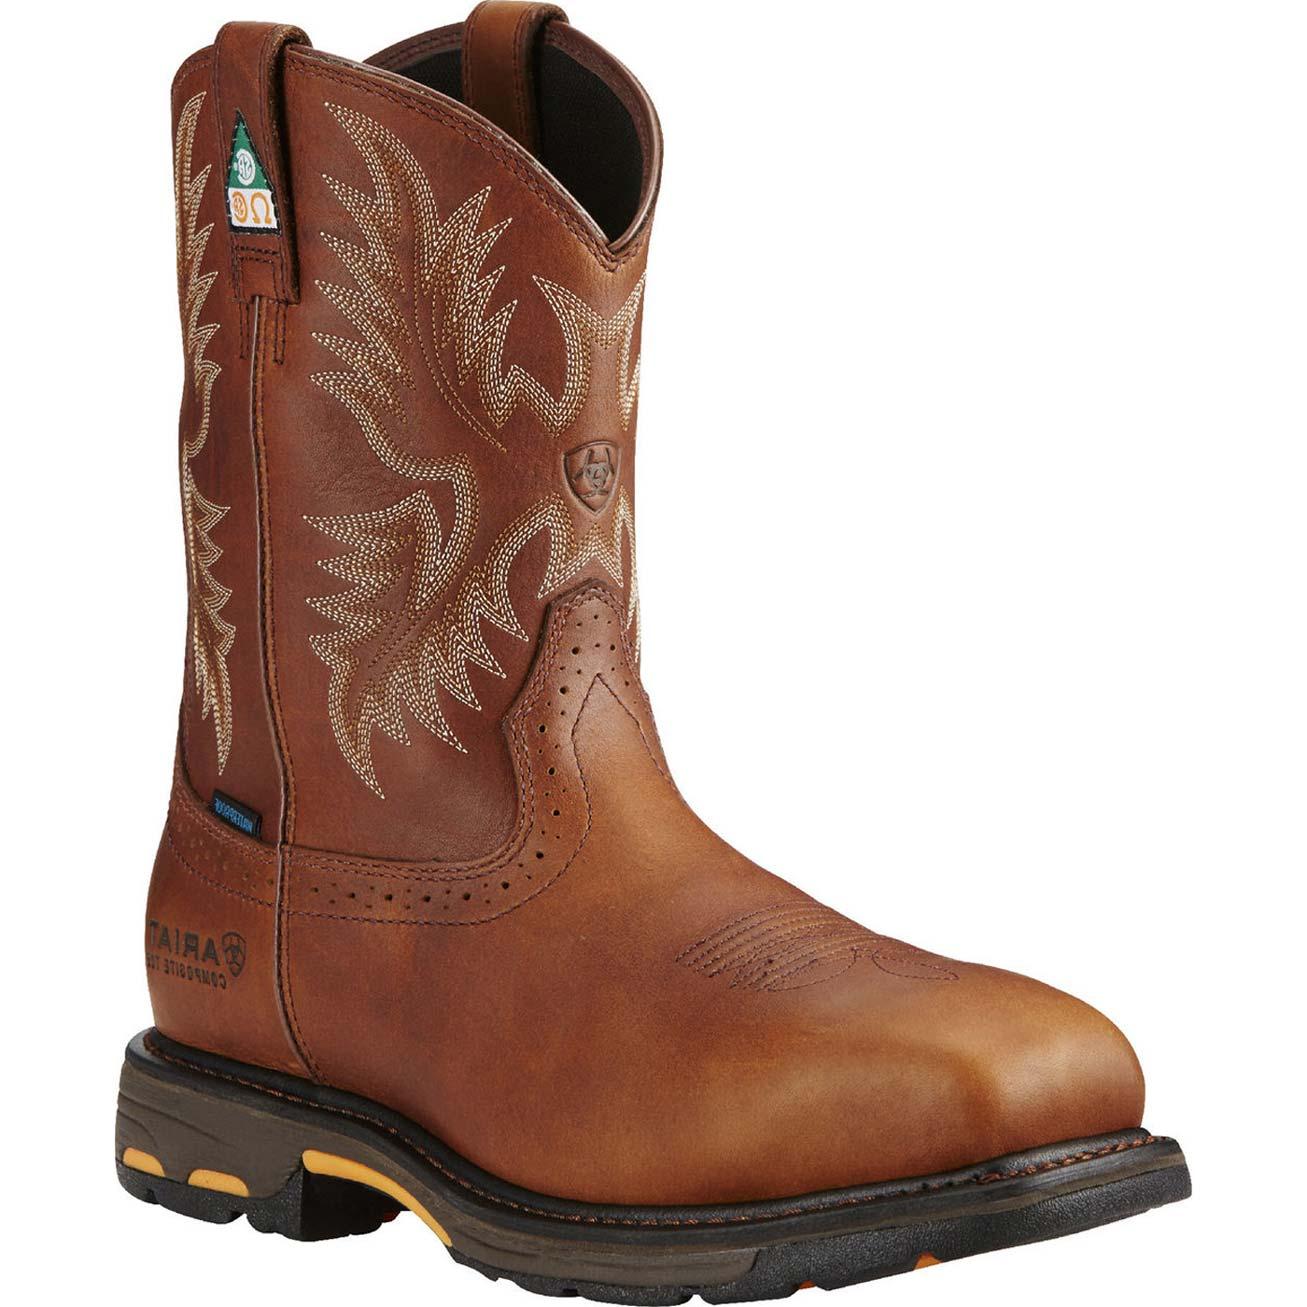 Are Ariat Boots Csa Approved?